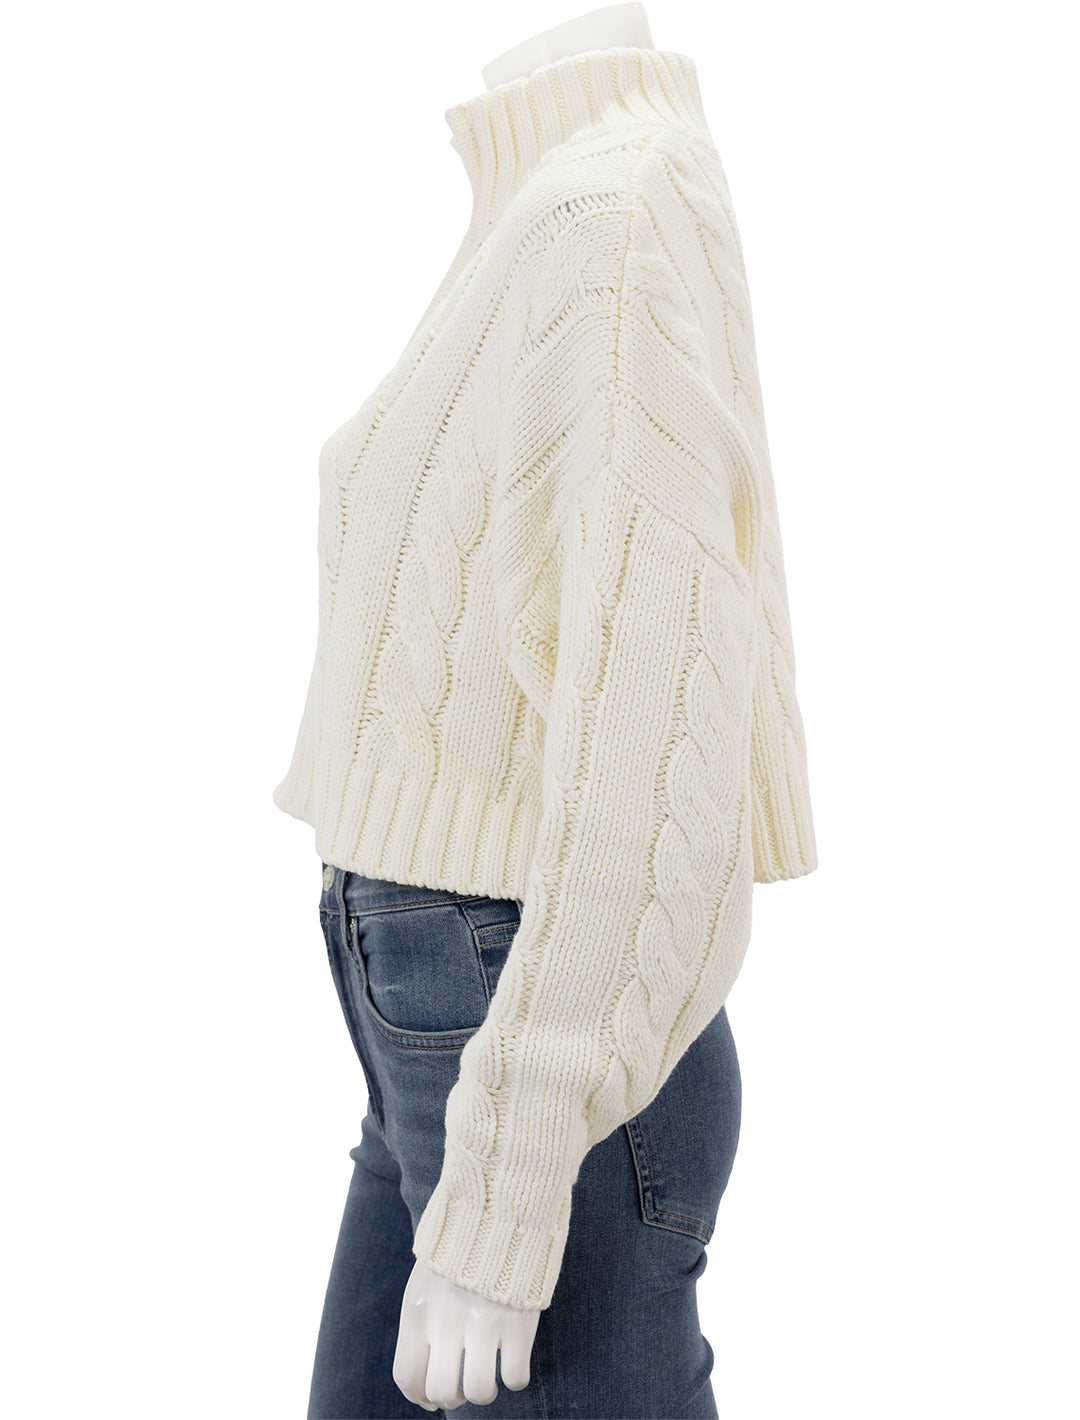 Side view of STAUD's cropped hampton sweater in ivory.